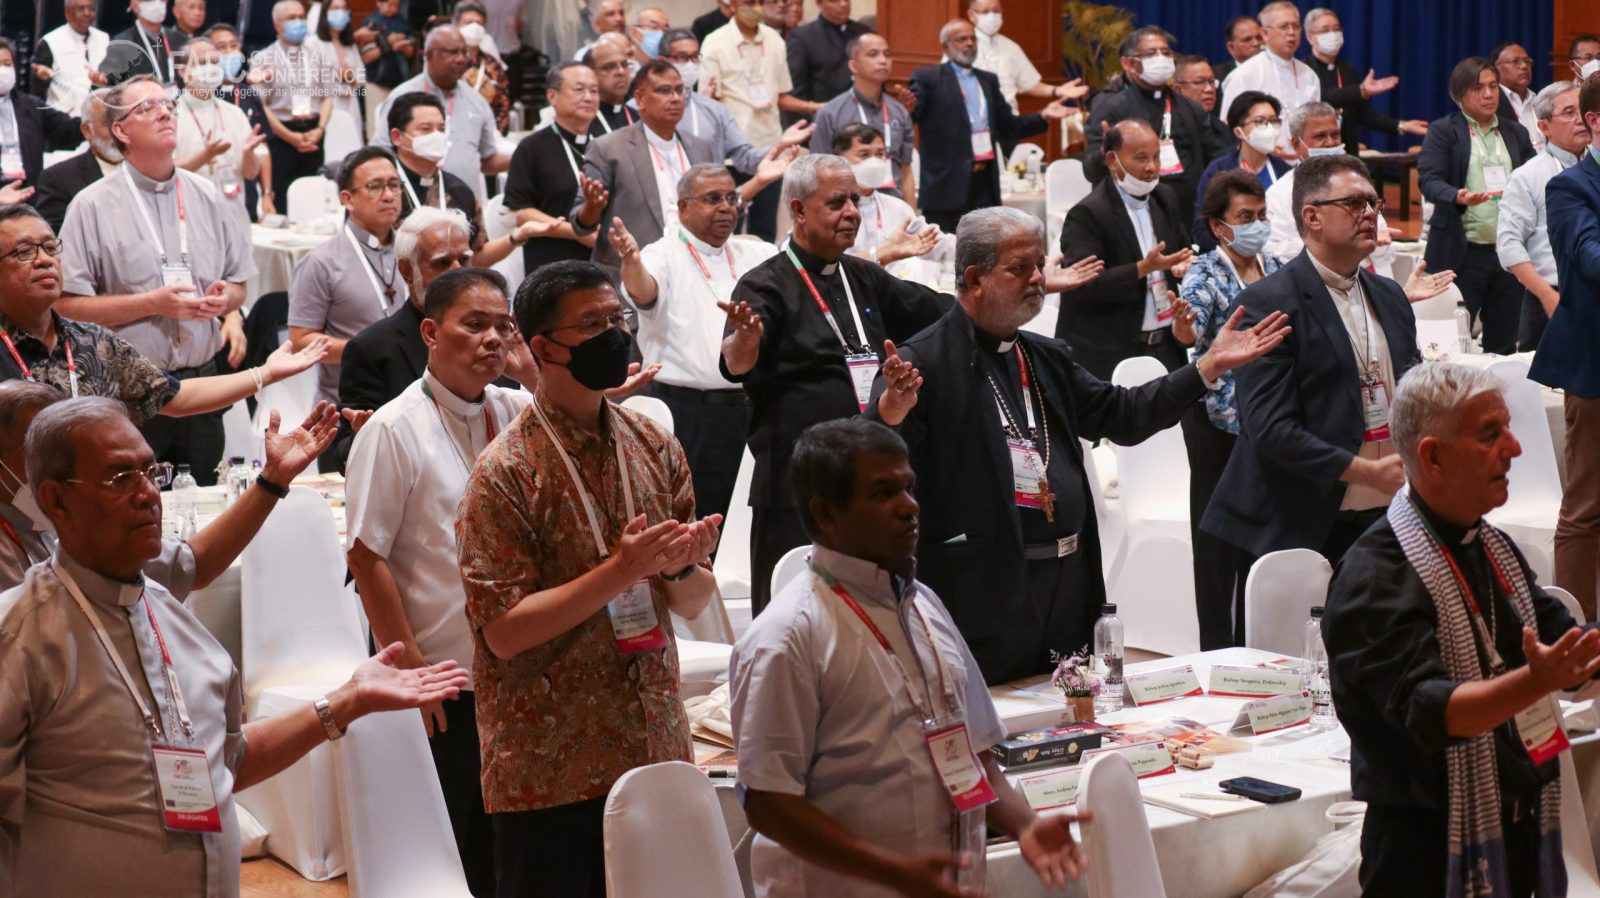 Church leaders from across Asia join a session of the general conference of the Federation of Asian Bishops’ Conferences on October 18, 2022. FABC50